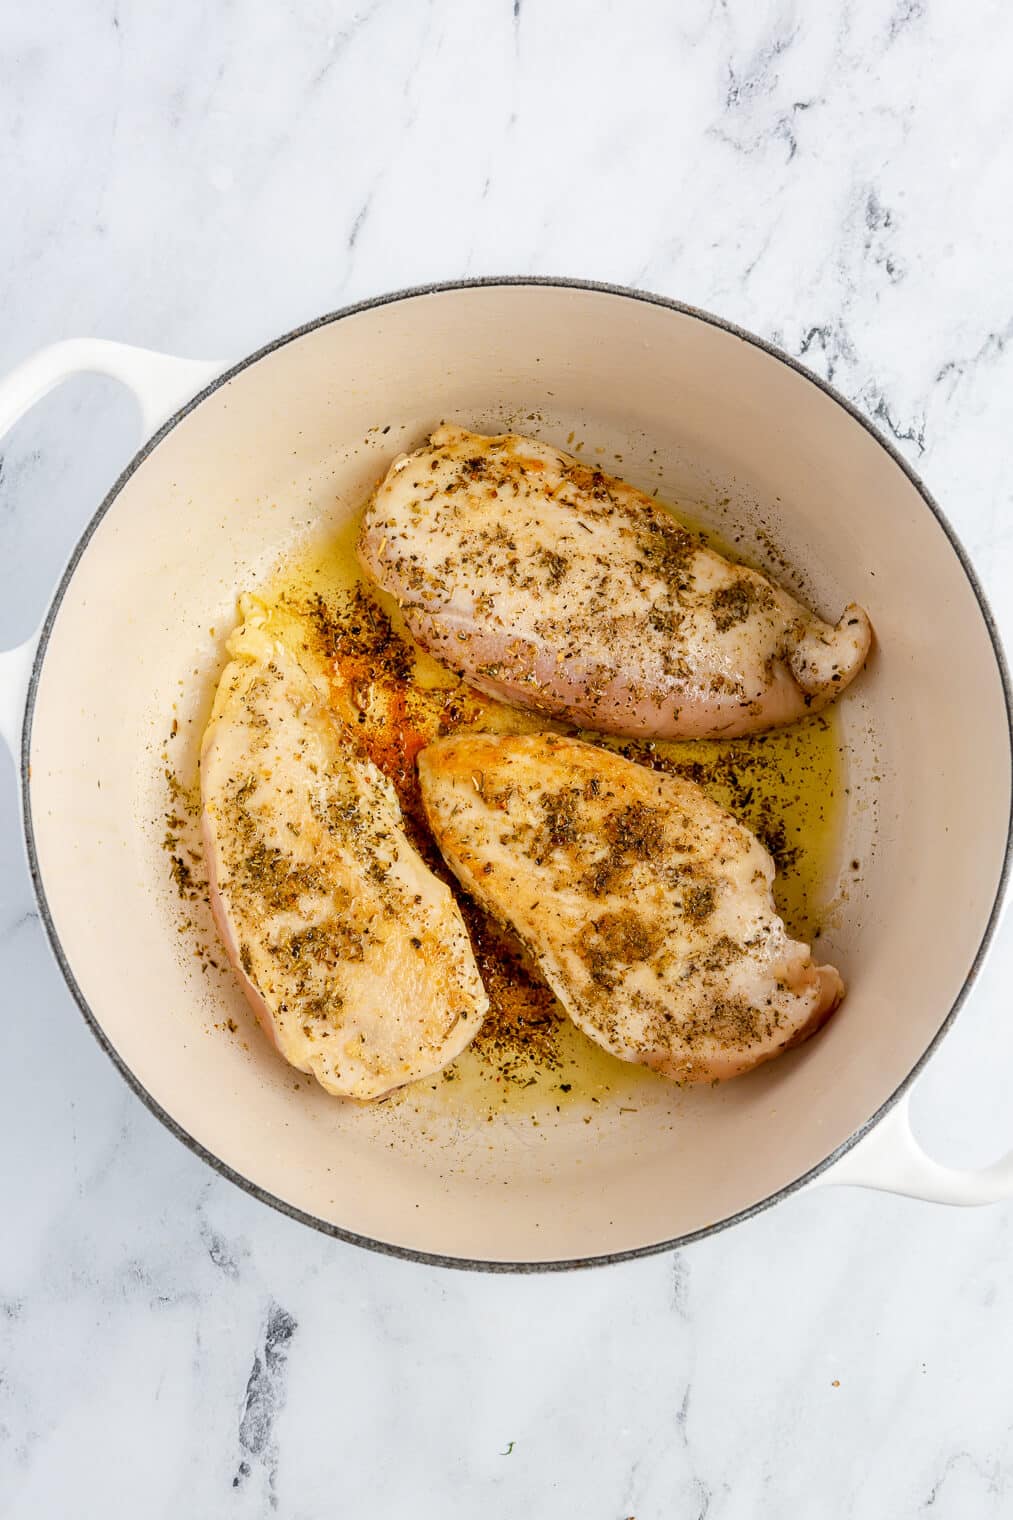 3 large chicken breasts dusted with salt and Italian seasoning searing in a large enameled cast iron pot.